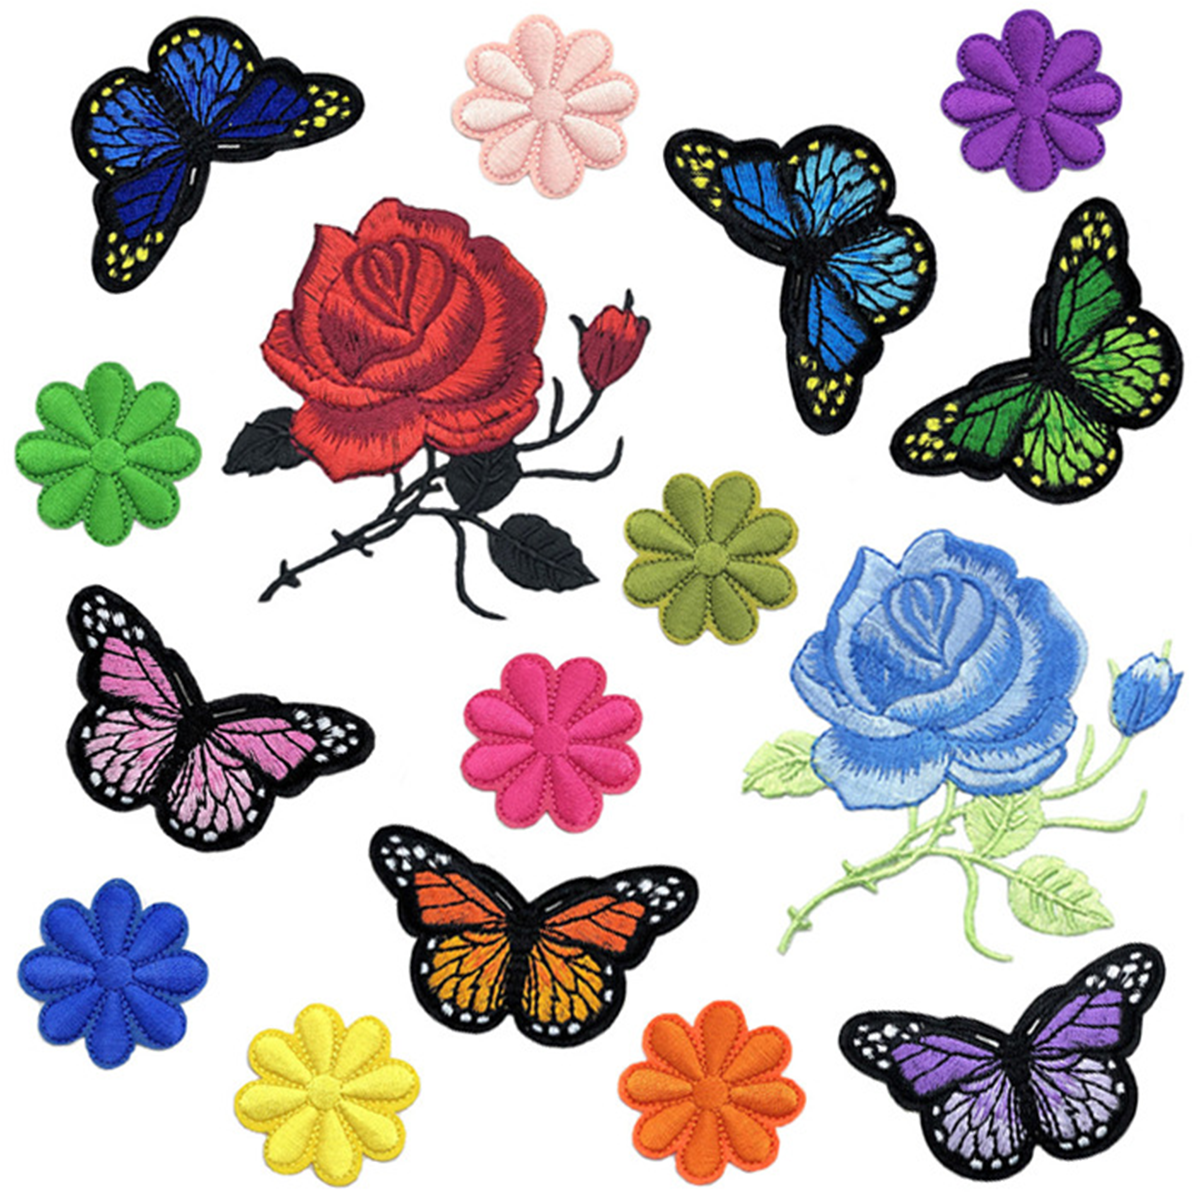 Embroidery Applique Patch On Clothing Curtain Applique Bag TraveT 5pcs Flower Patch Iron on Patches 